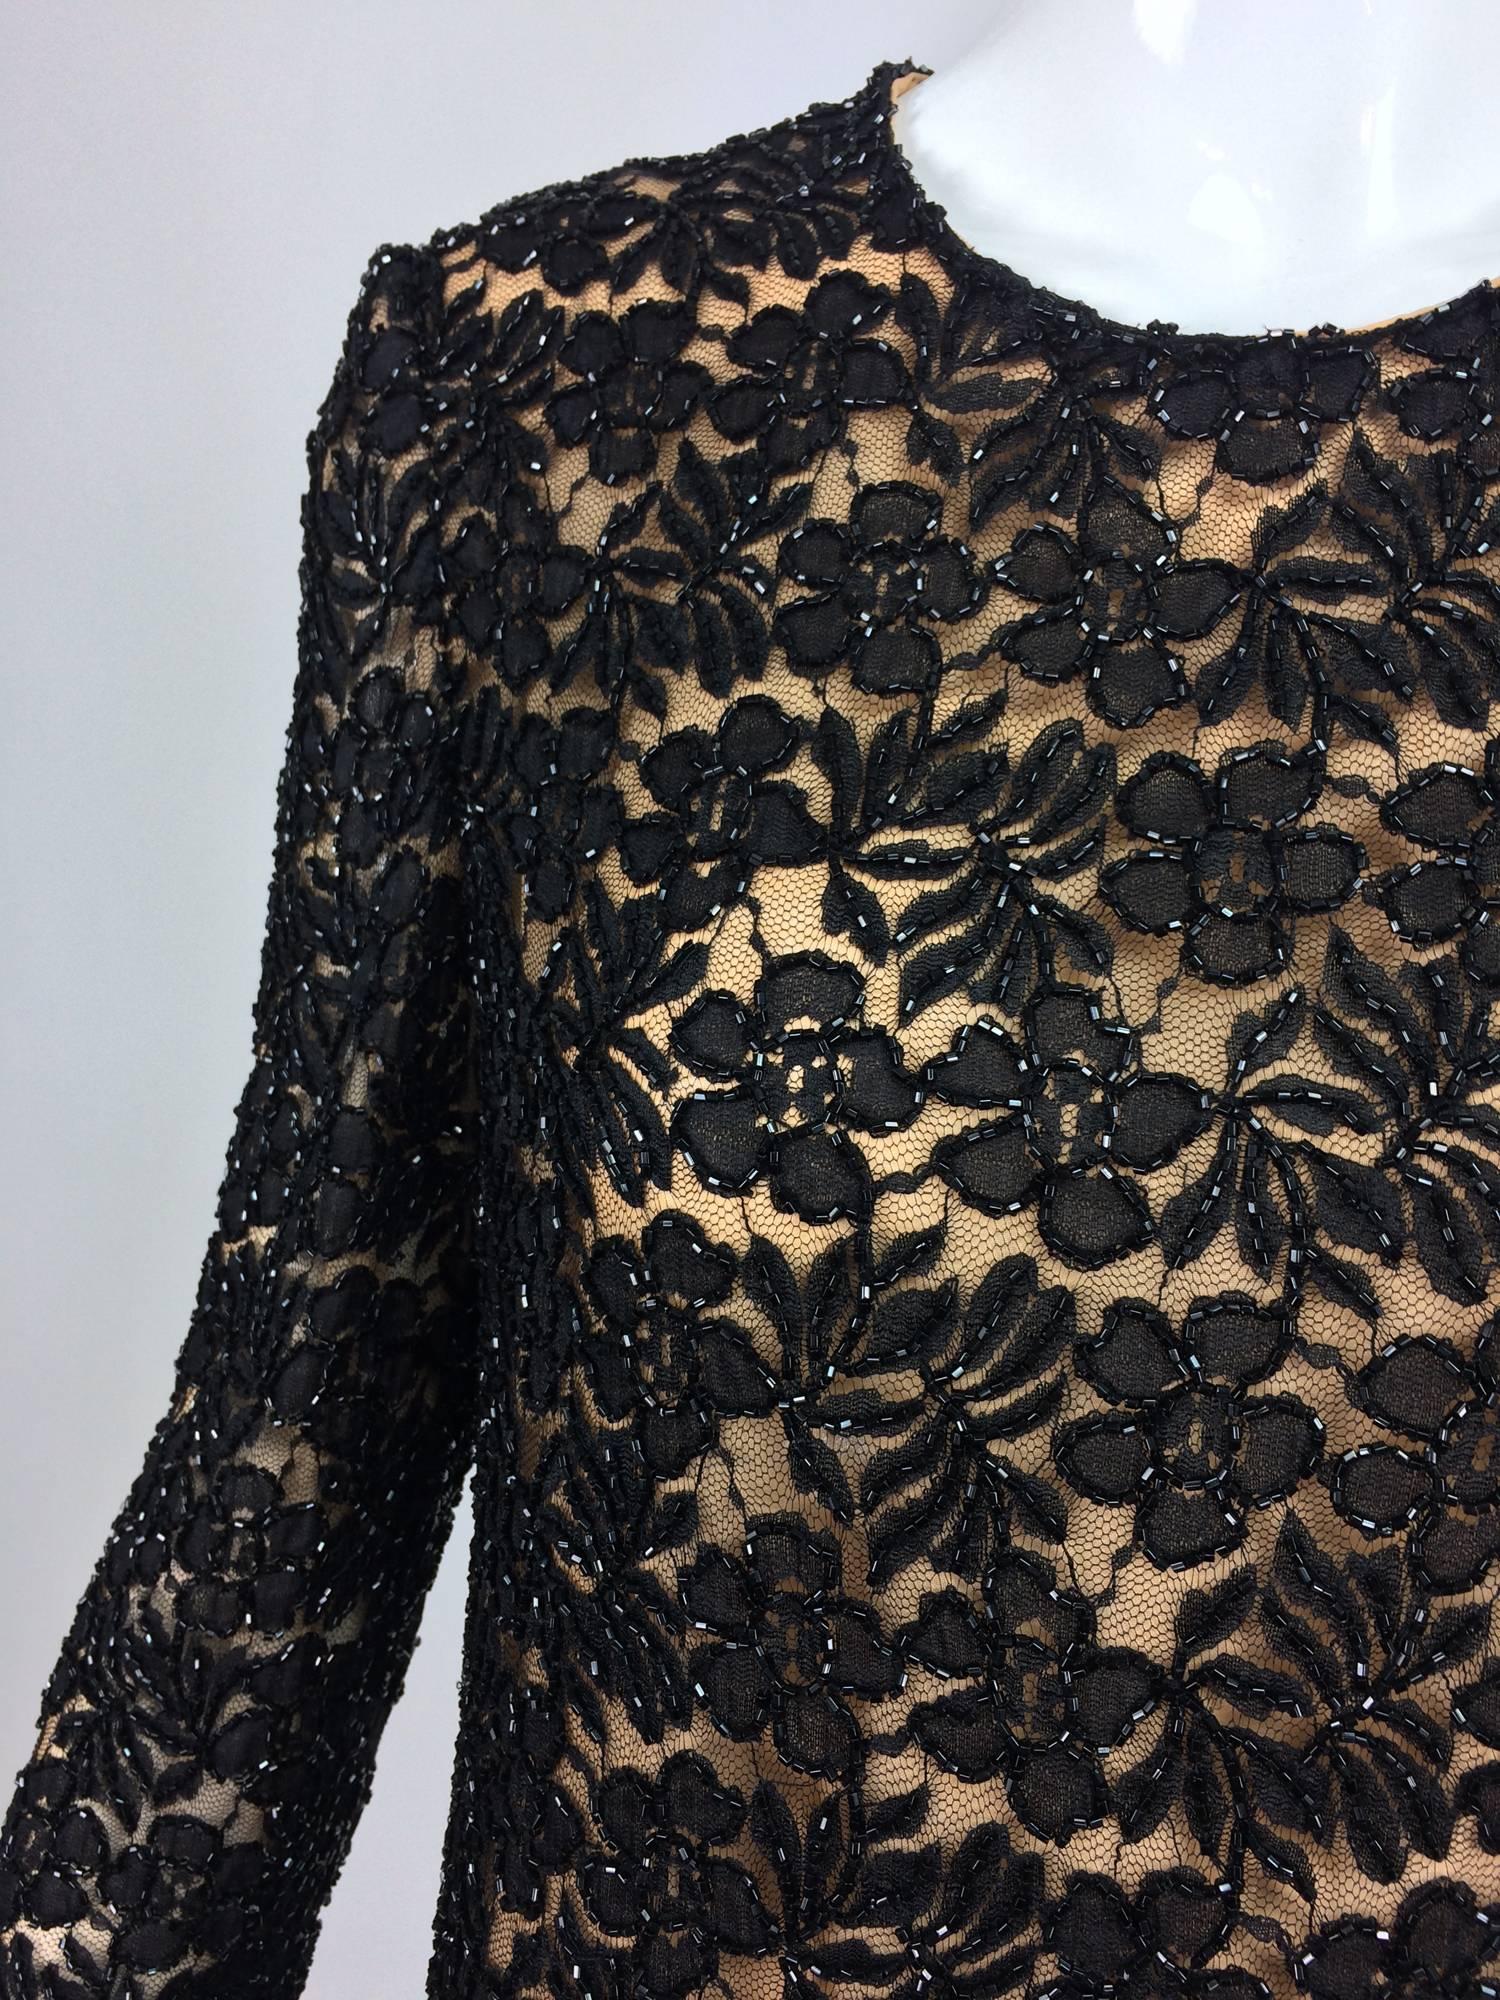 Mod style shift dress from the early 1960s...Black floral lace is beaded in black glass beads...Jewel neckline, long sleeves slightly A line dress...Lined in nude organza...The dress closes at the back with a zipper and hook and eye...Custom